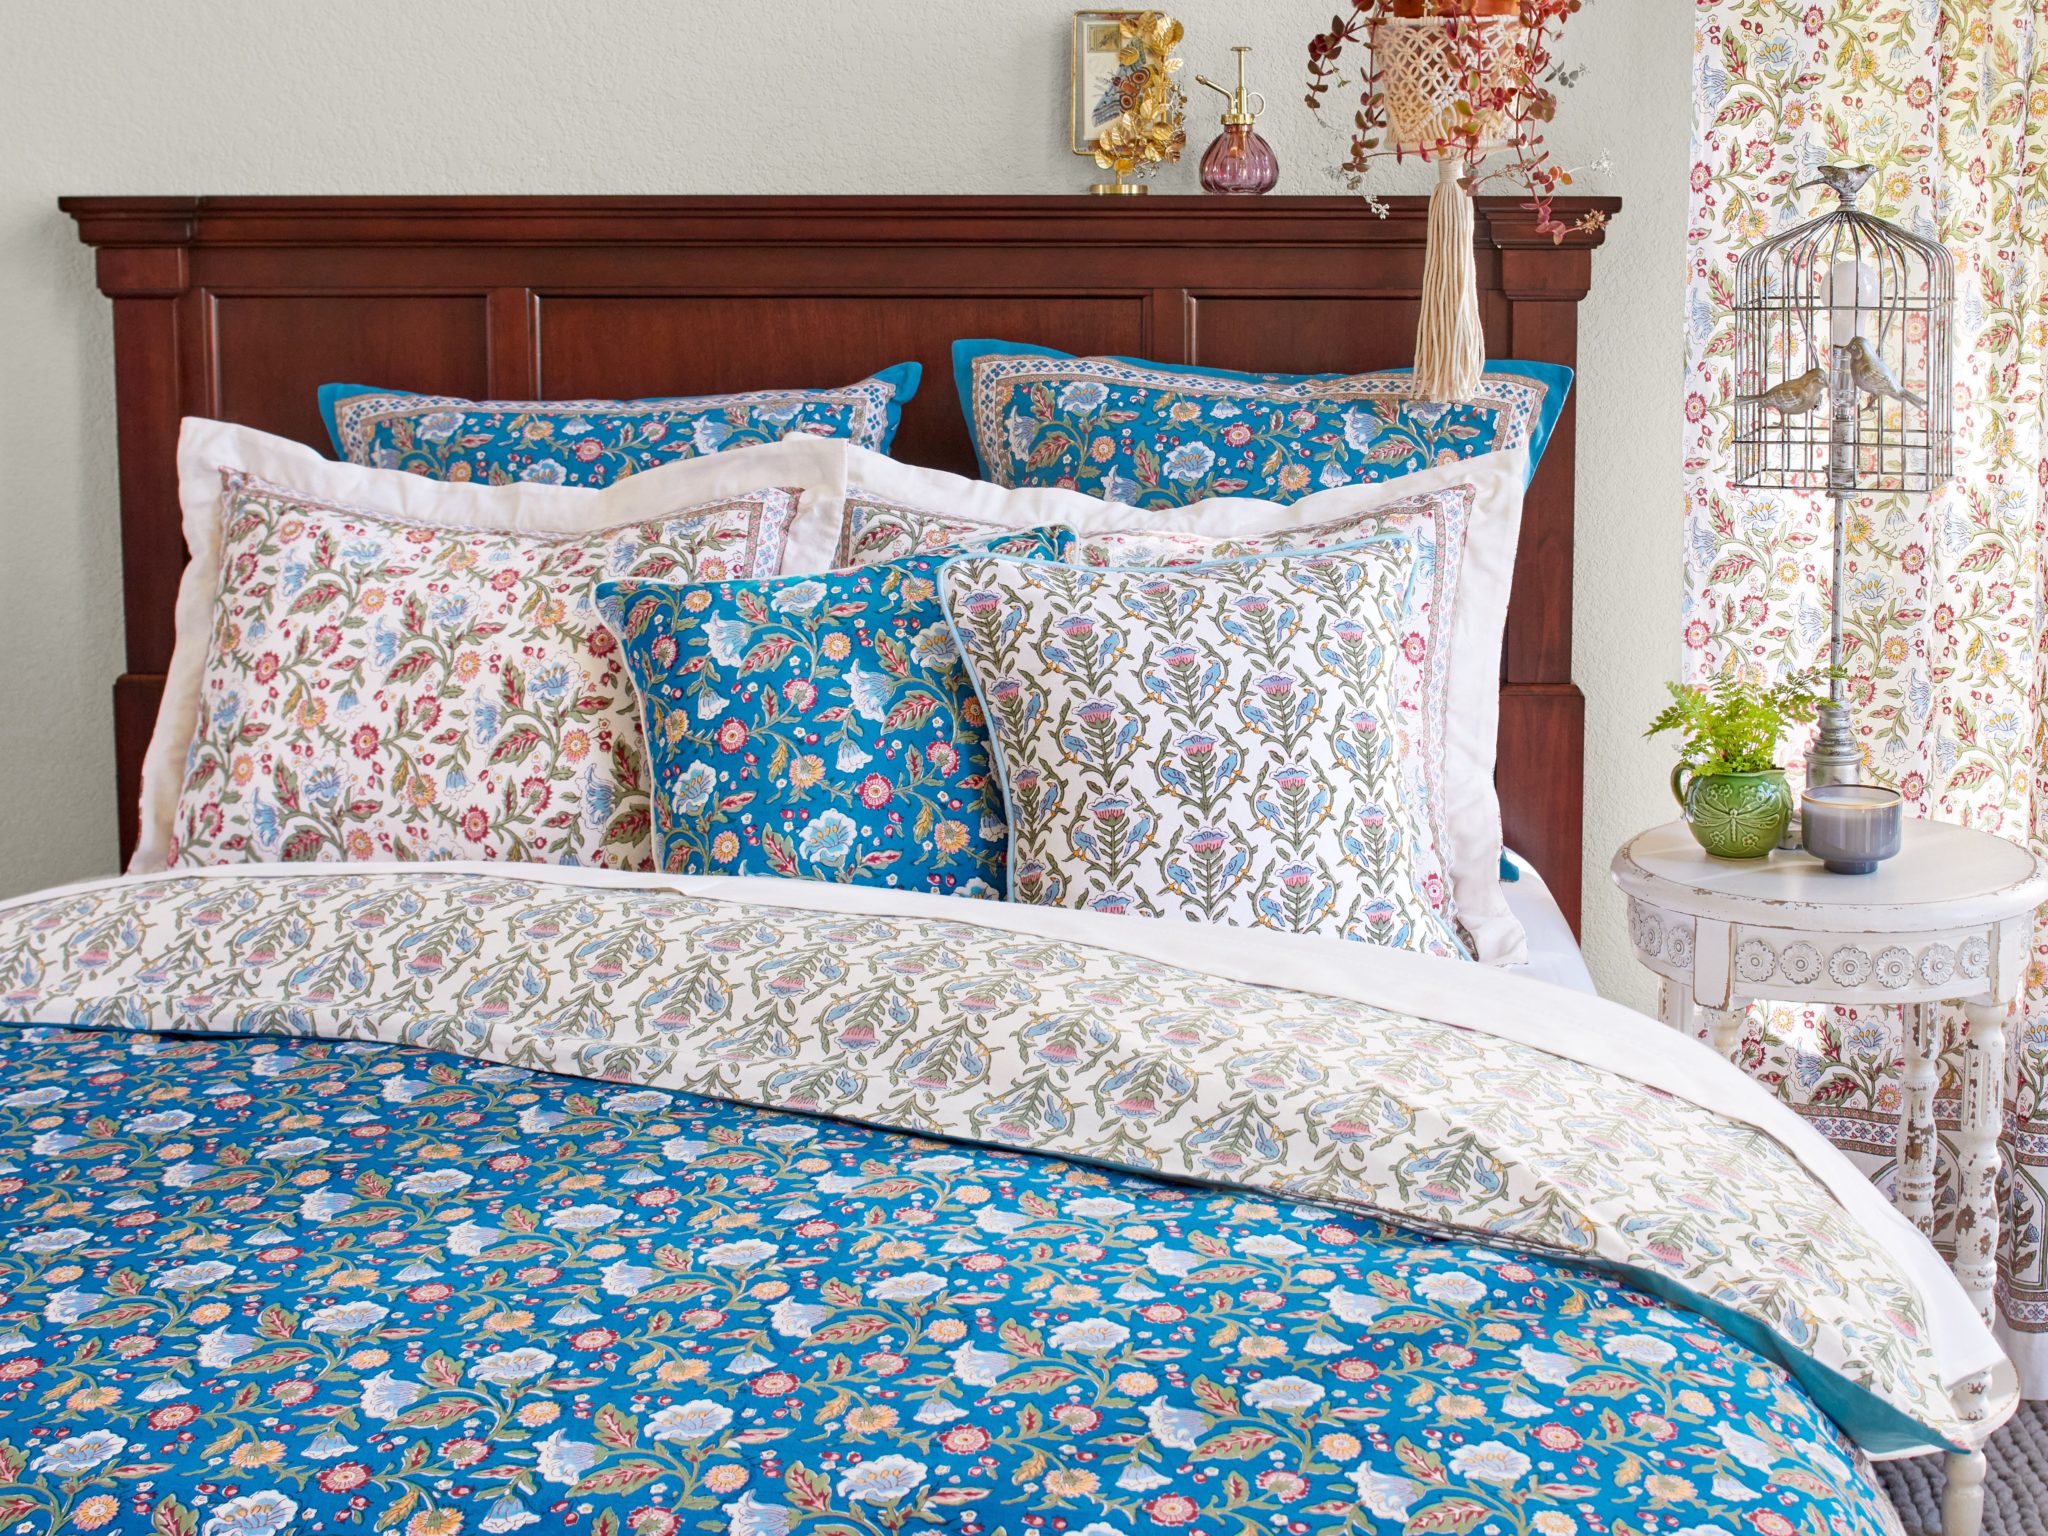 French Country Bedding: 5 Bedding Sets for a Provincial Bedroom